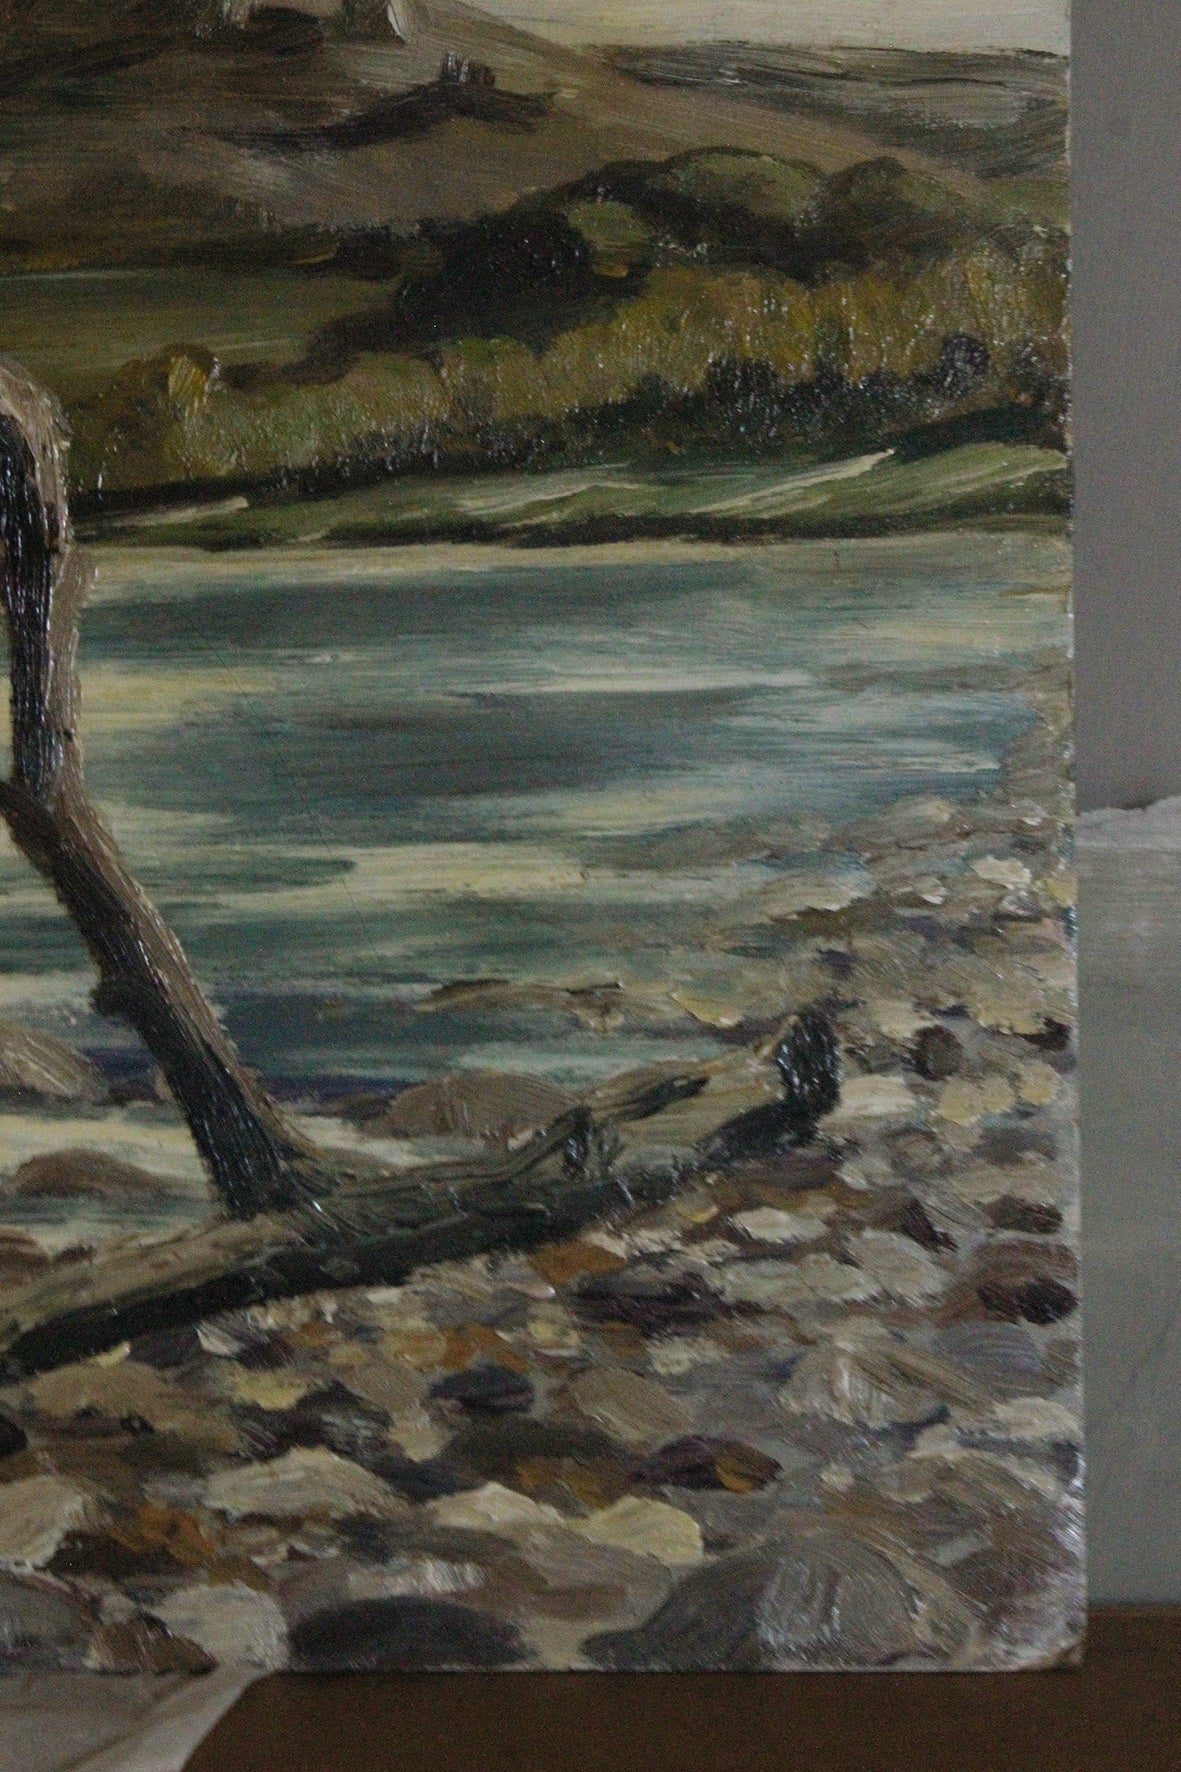 "The Drifted Branch" - Mid Century Oil Painting